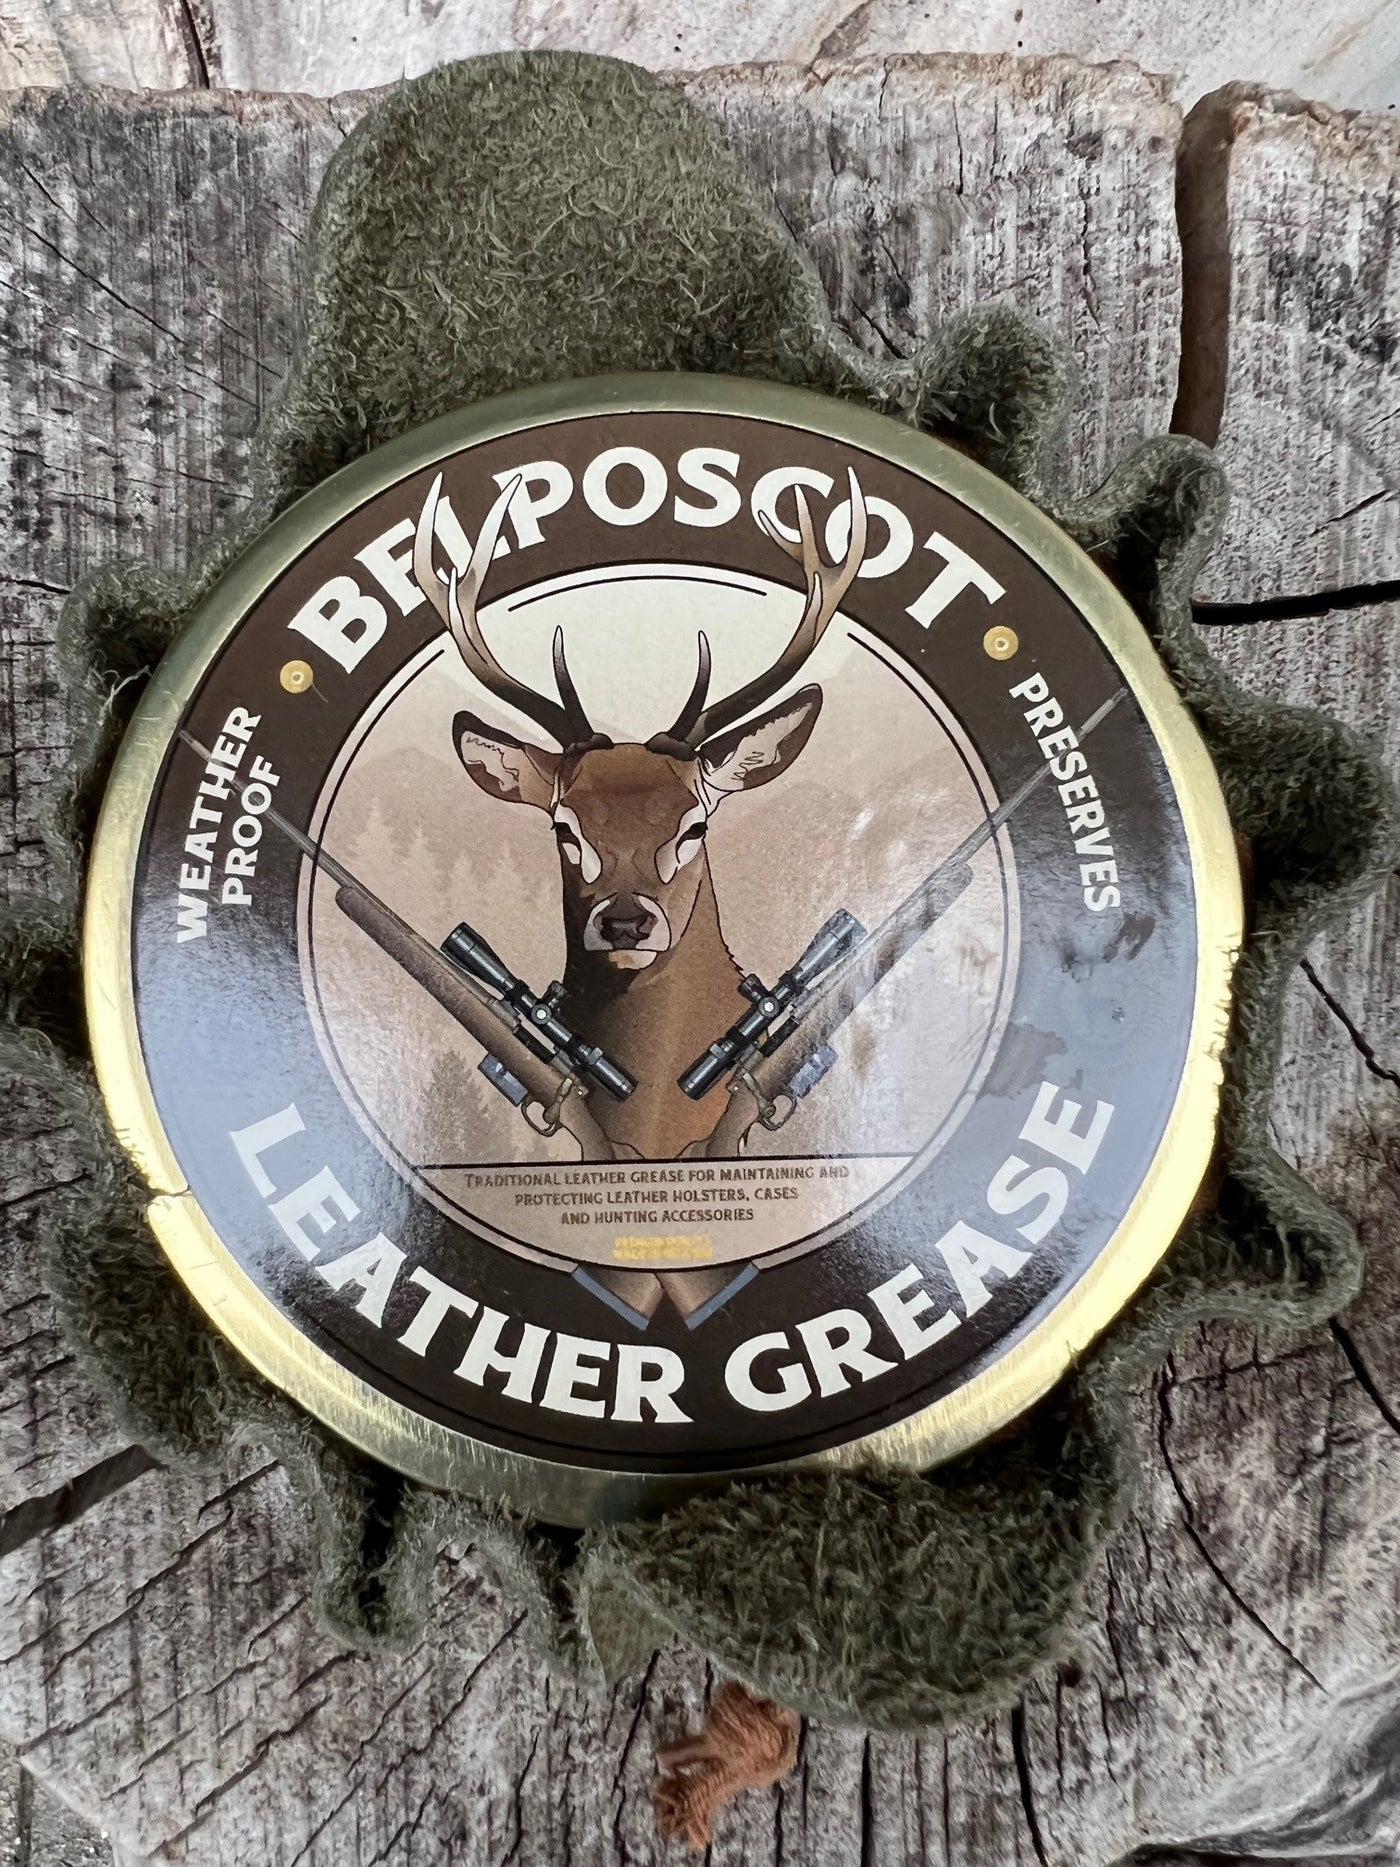 Belposcot leather grease